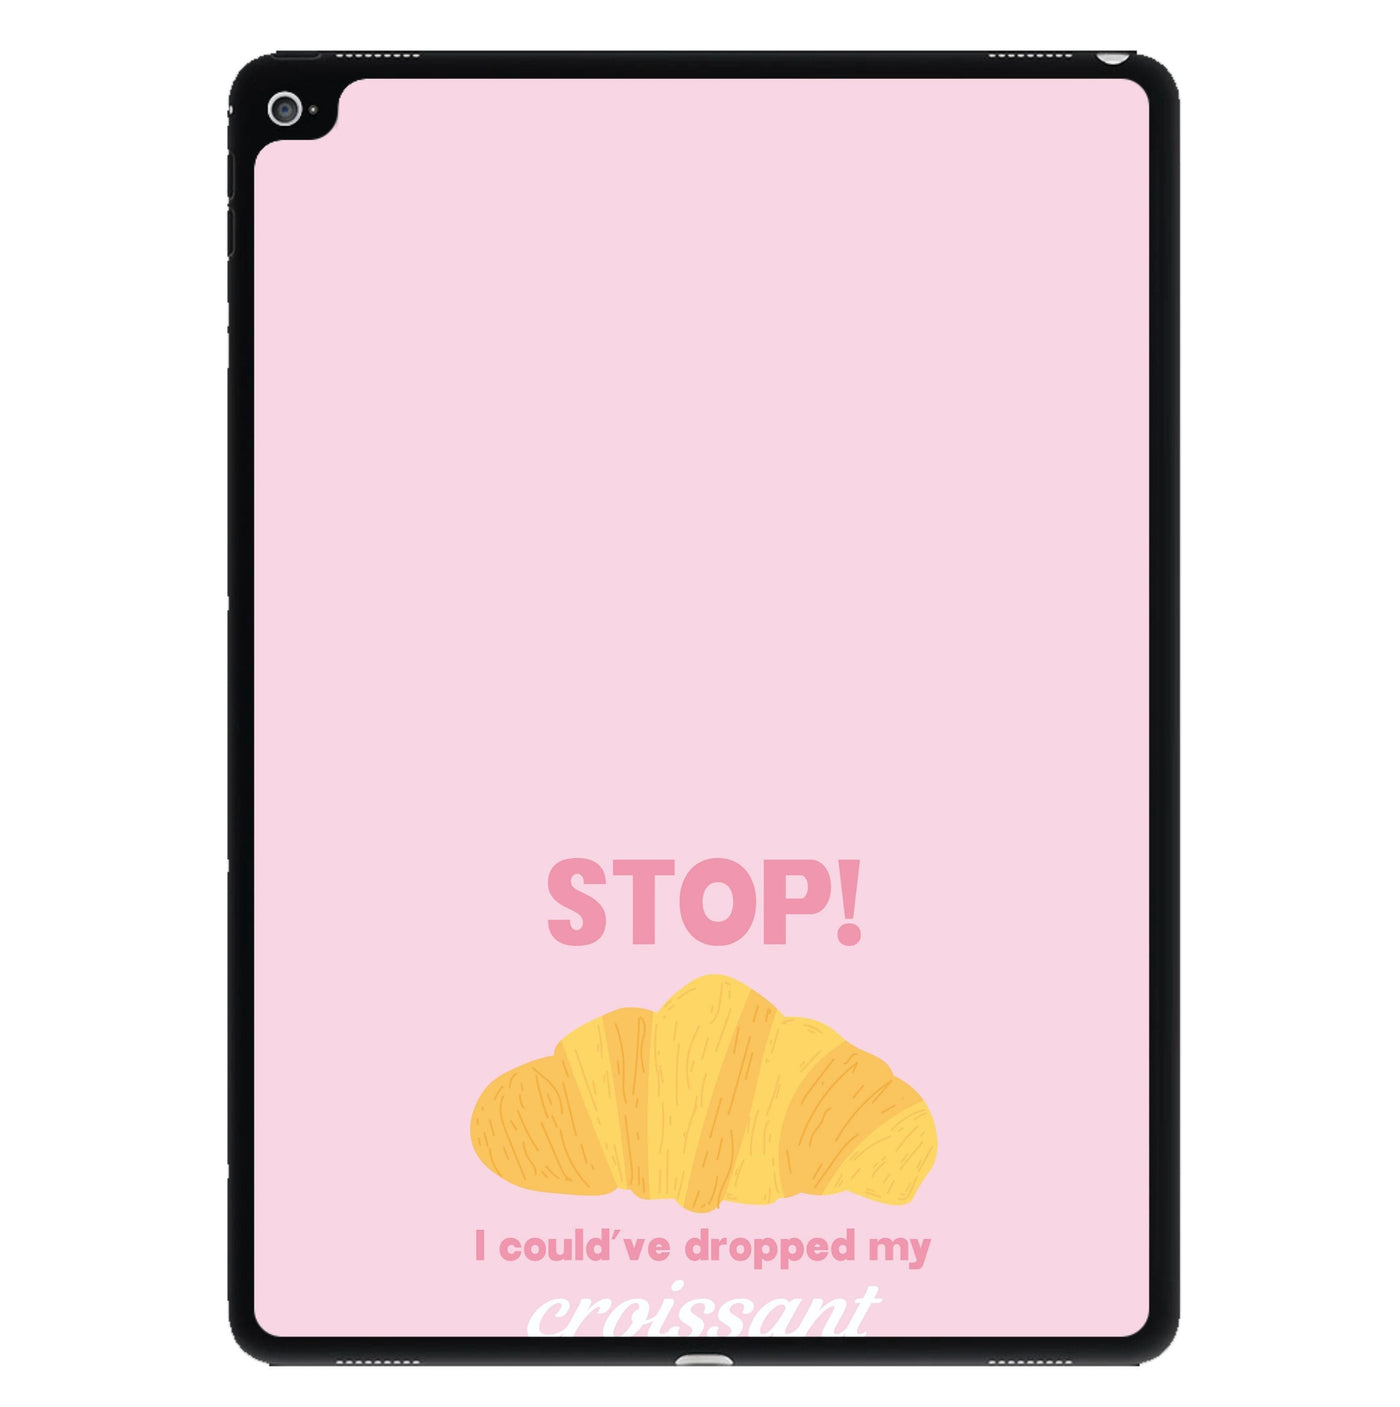 I Could've Dropped My Croissant - Memes iPad Case